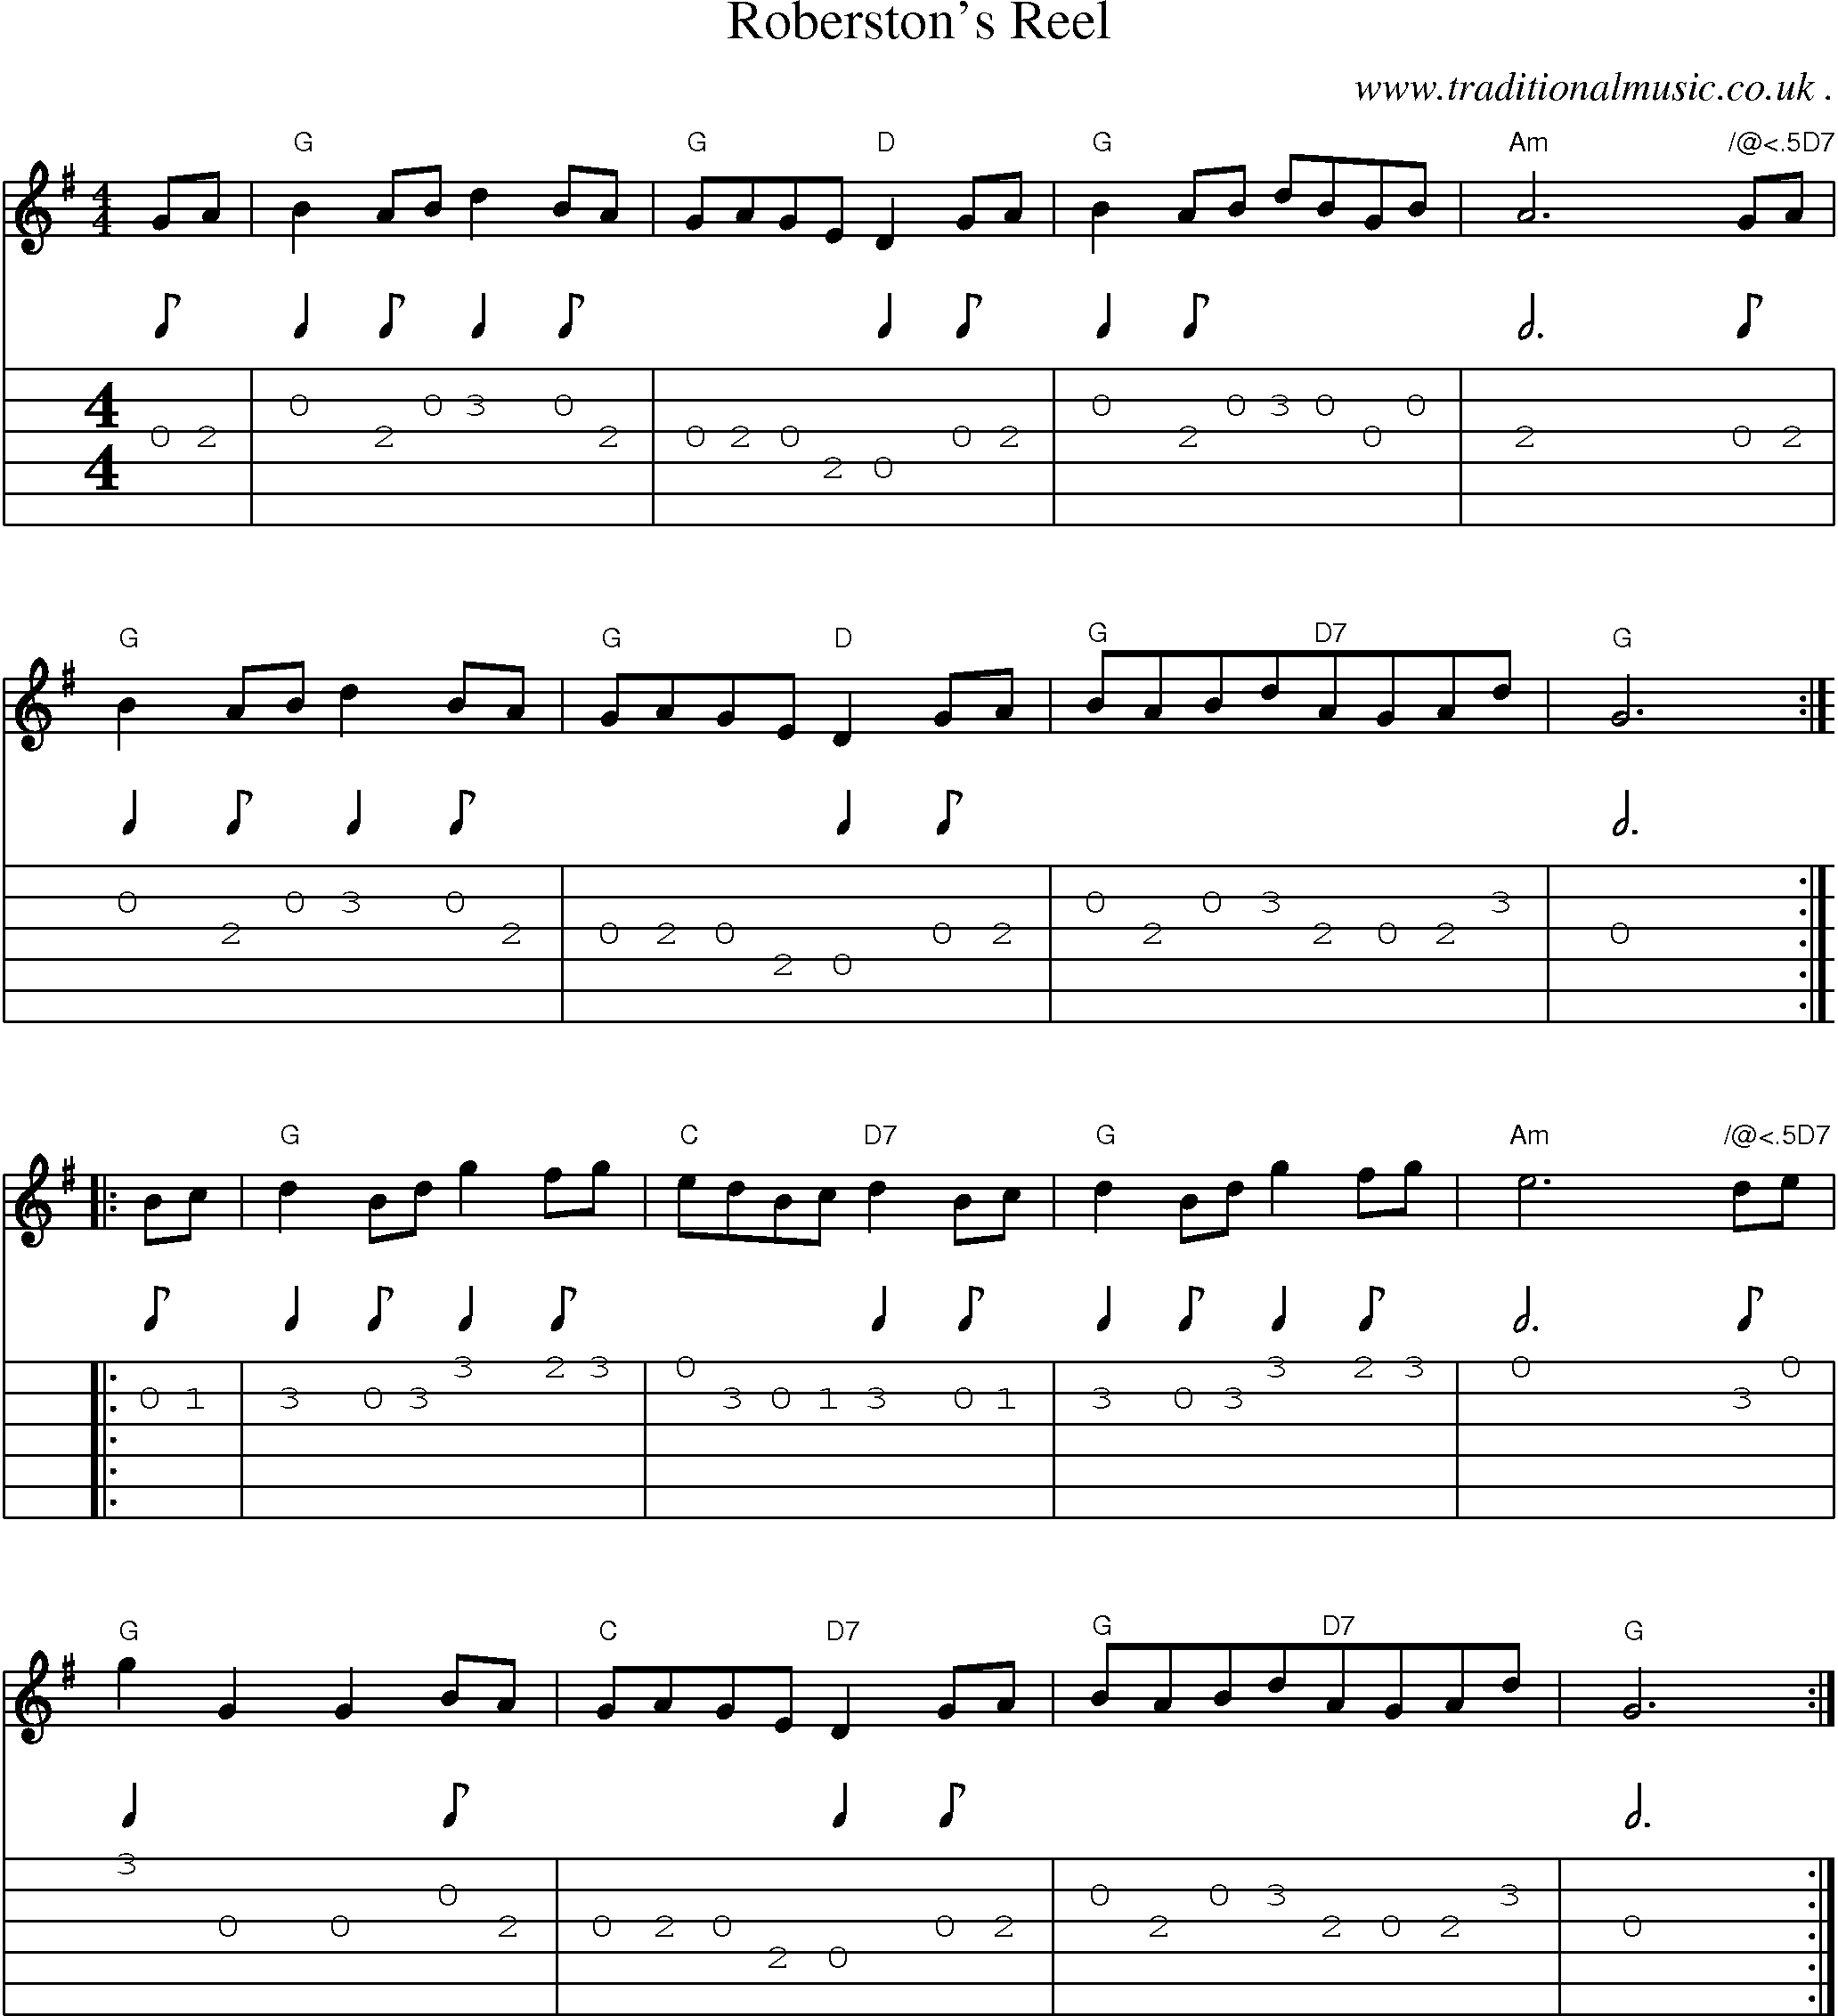 Sheet-Music and Guitar Tabs for Roberstons Reel